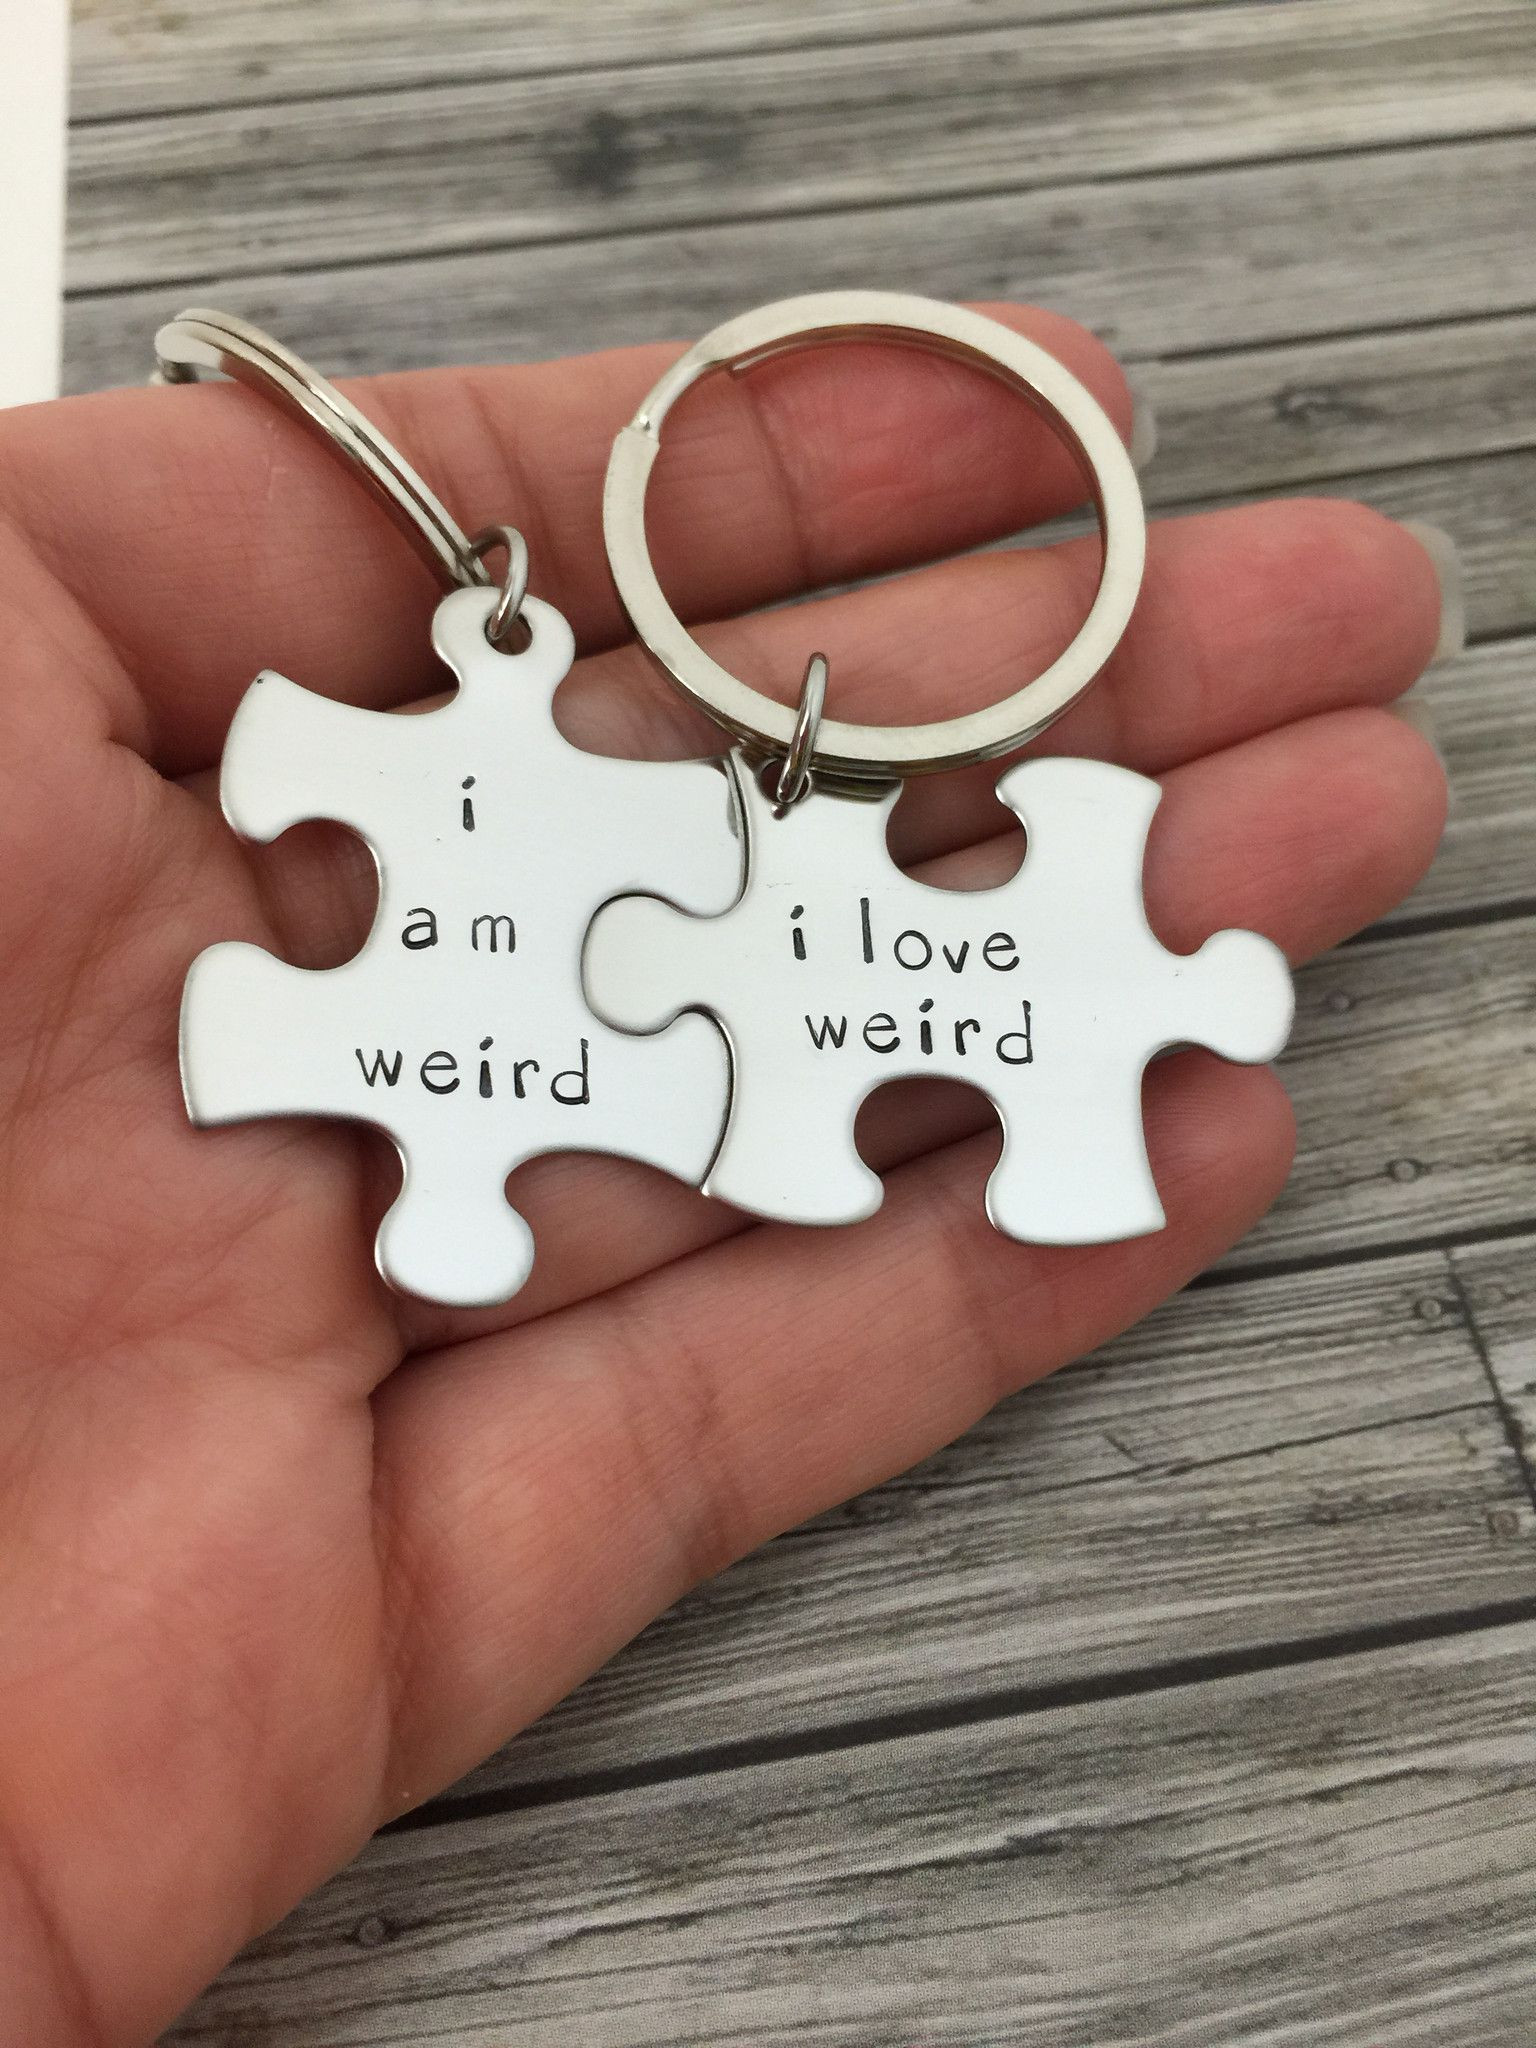 Cool Gift Ideas For Couples
 I am weird I love weird Couples Keychains Couples Gift